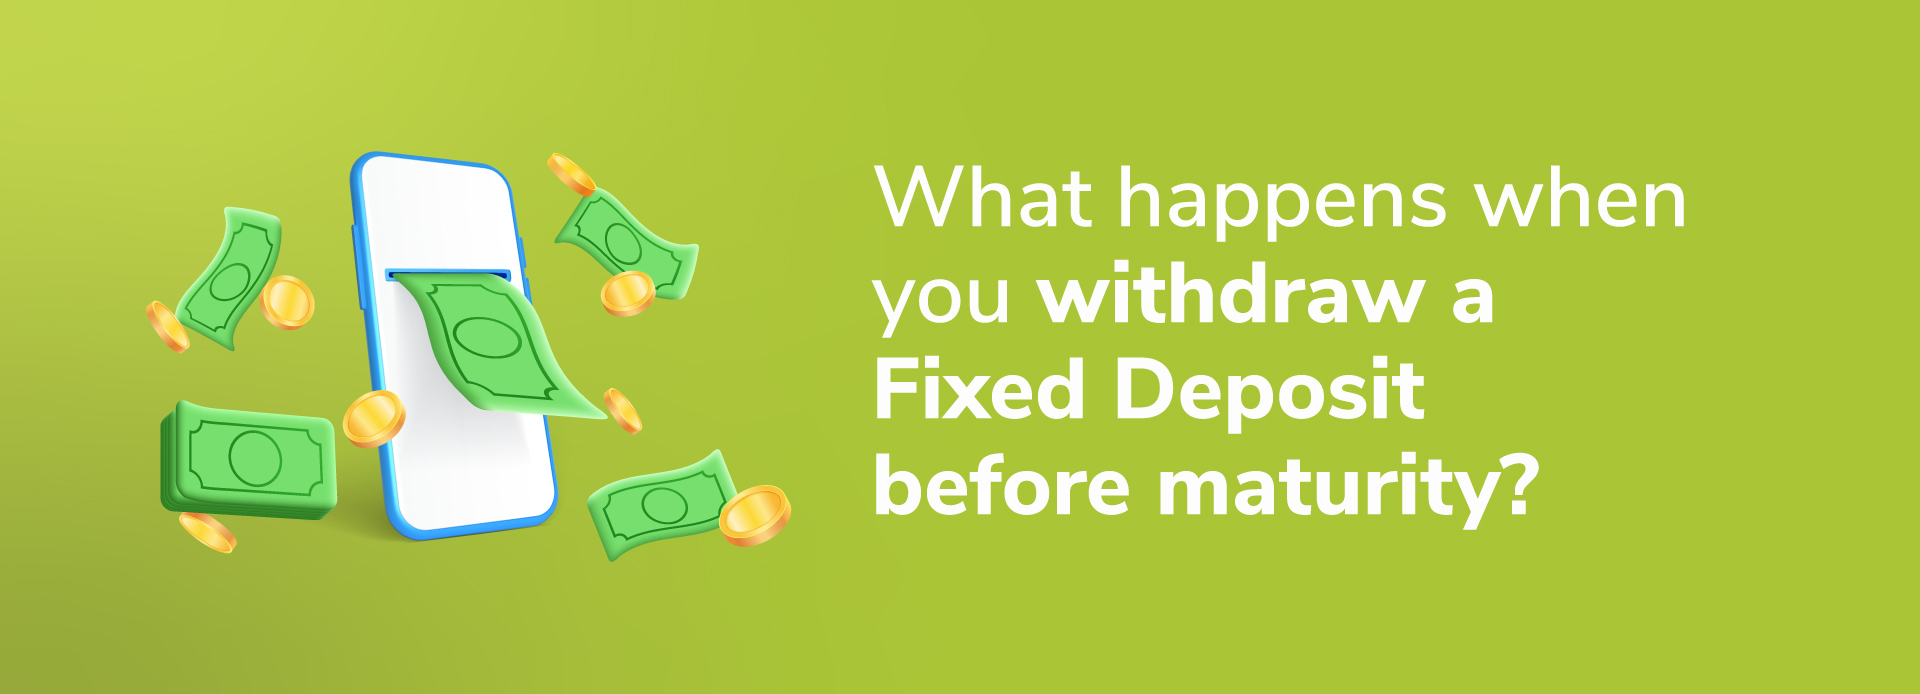 What happens when you withdraw fixed deposit before maturity?